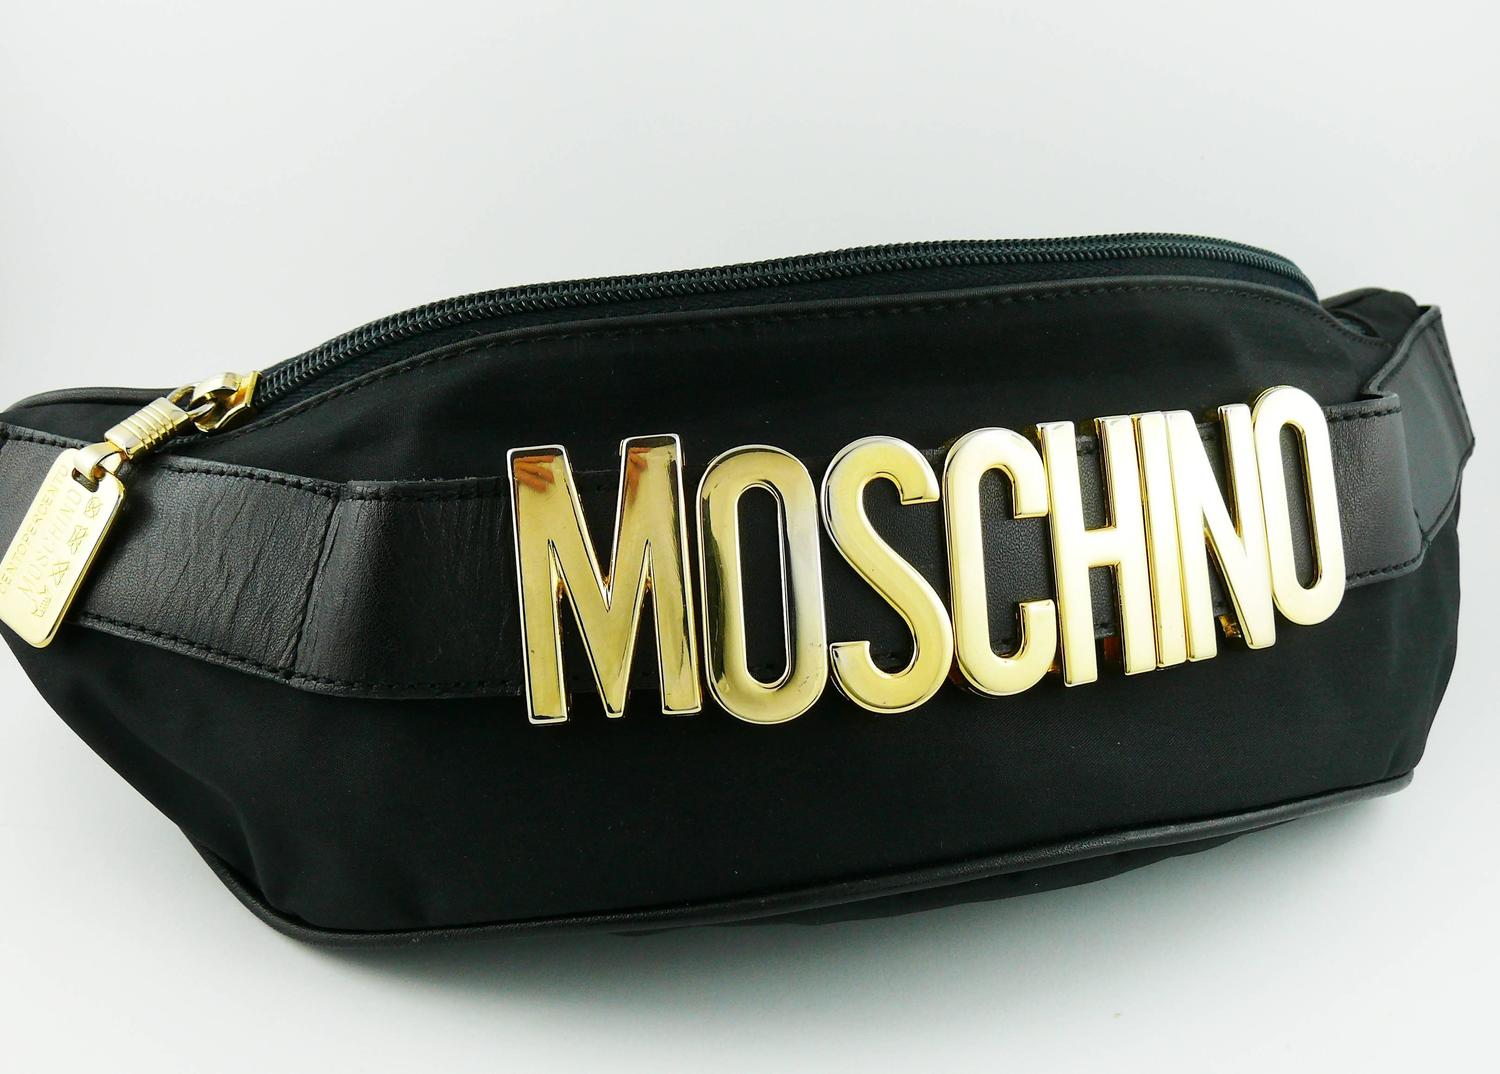 Moschino by Redwall Vintage 1990s Black Fanny Pack For Sale at 1stdibs